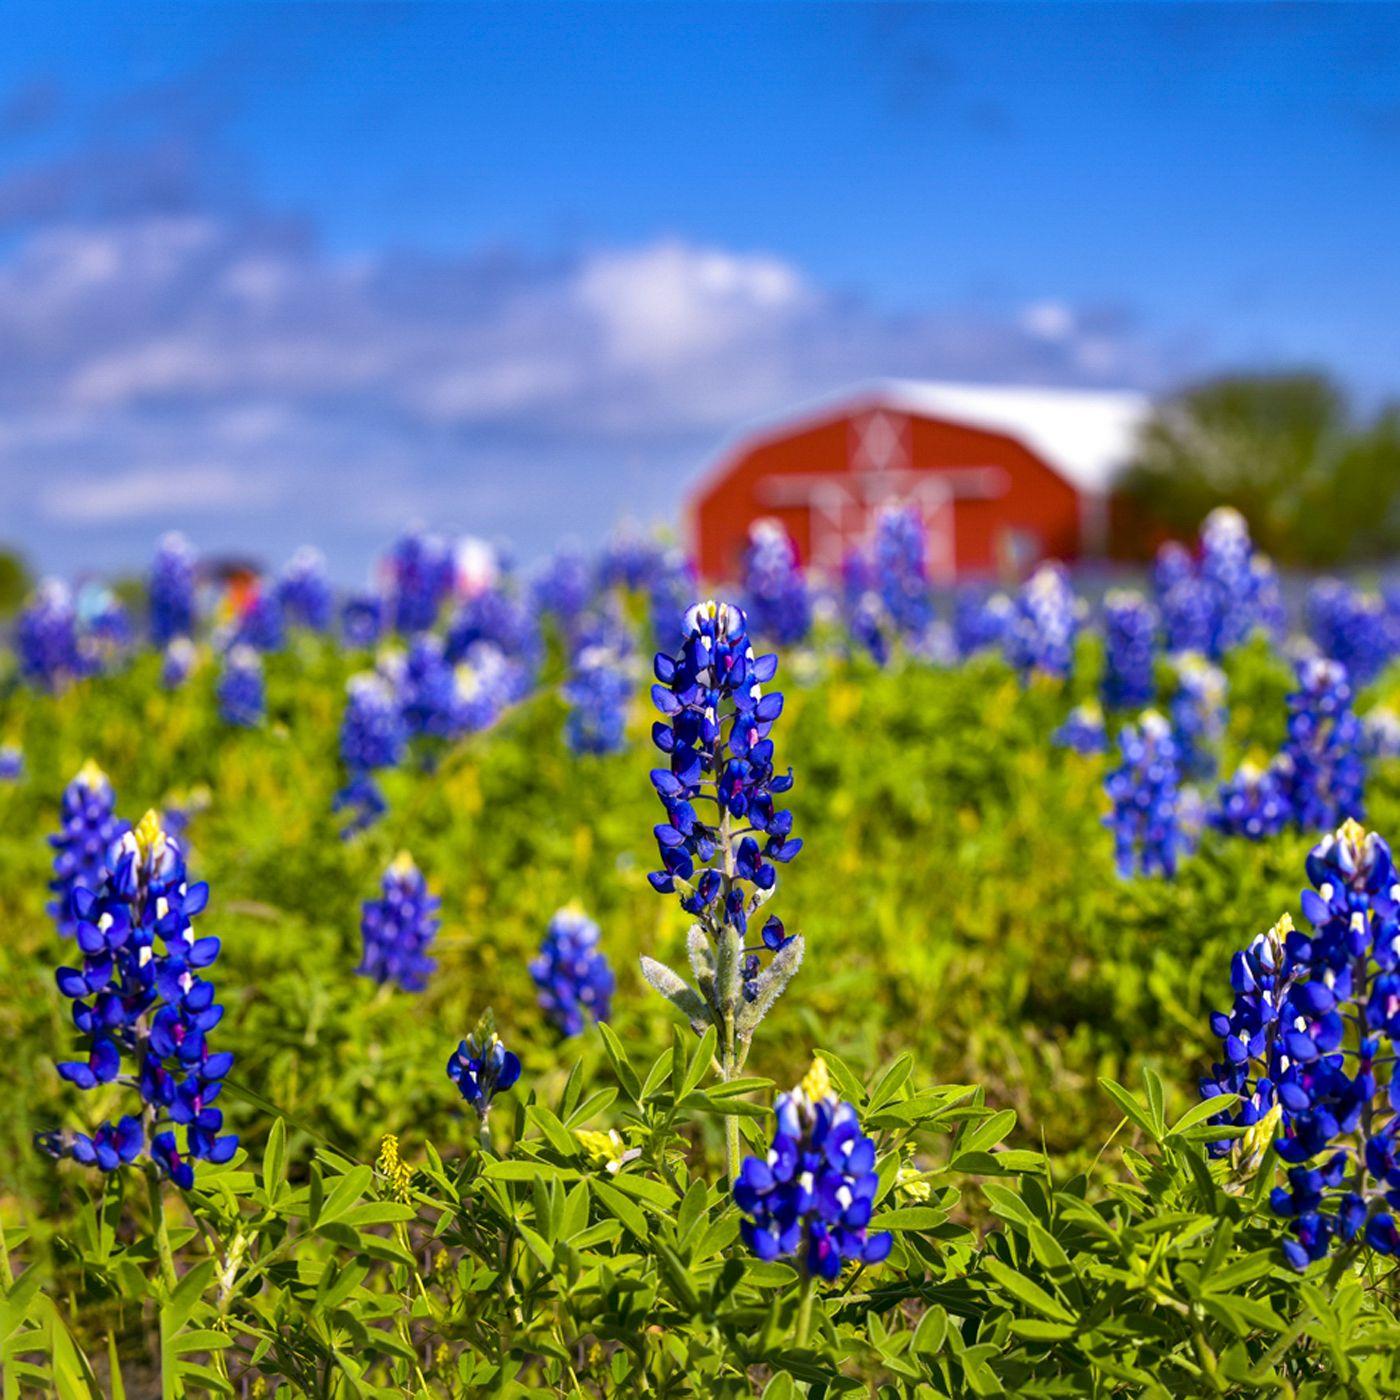 Alan Montgomery Landscape Photograph - Bluebonnets - Texas landscape with blue flowers in green grass, near red barn